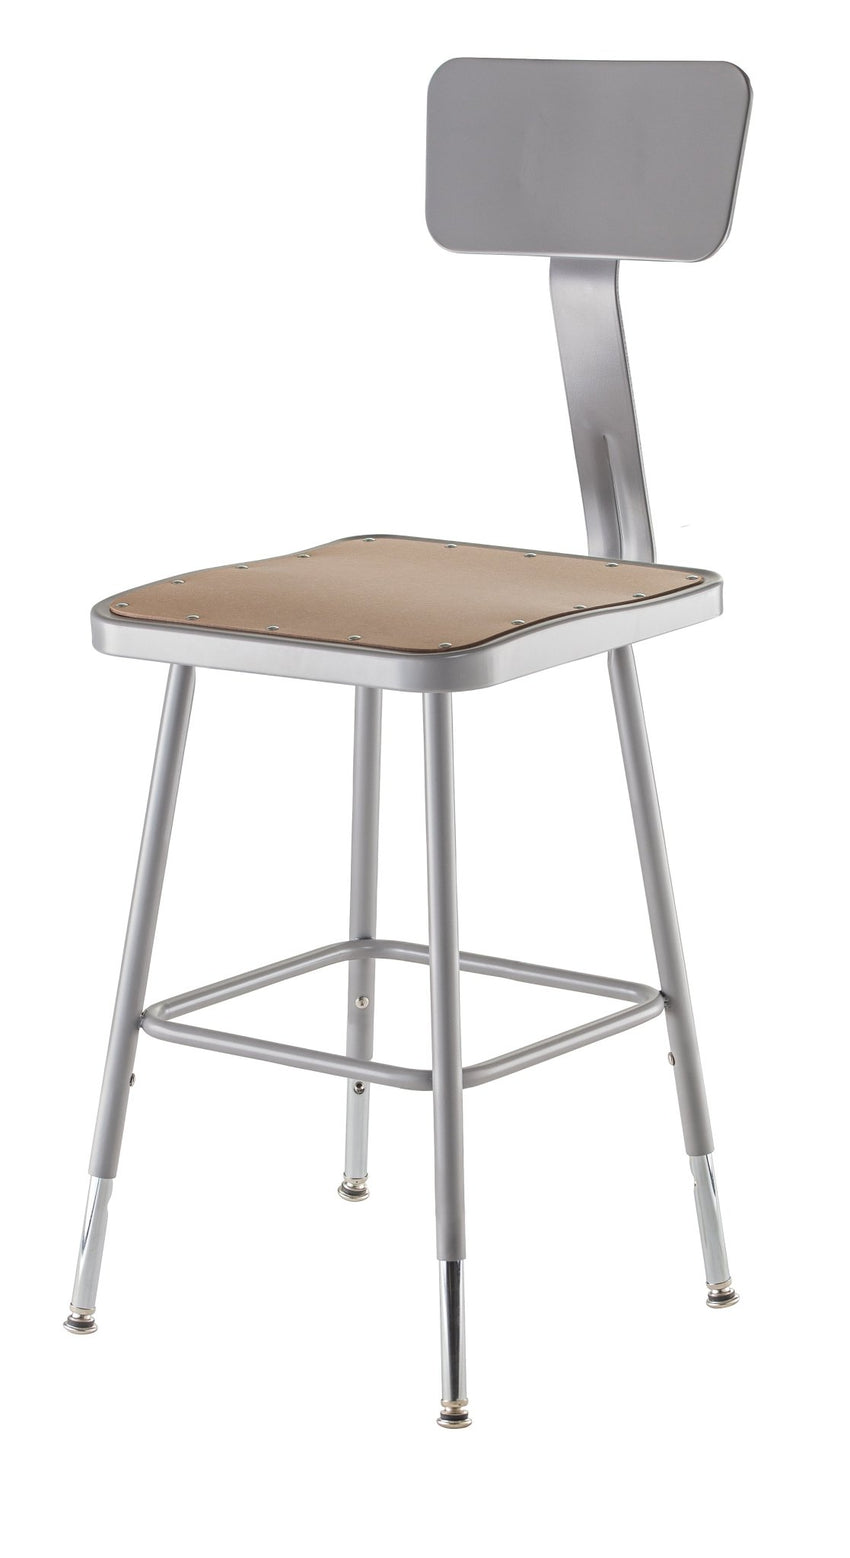 NPS 18" - 26" Height Adjustable Heavy Duty Square Seat Steel Stool with Backrest (National Public Seating NPS-6318HB) - SchoolOutlet